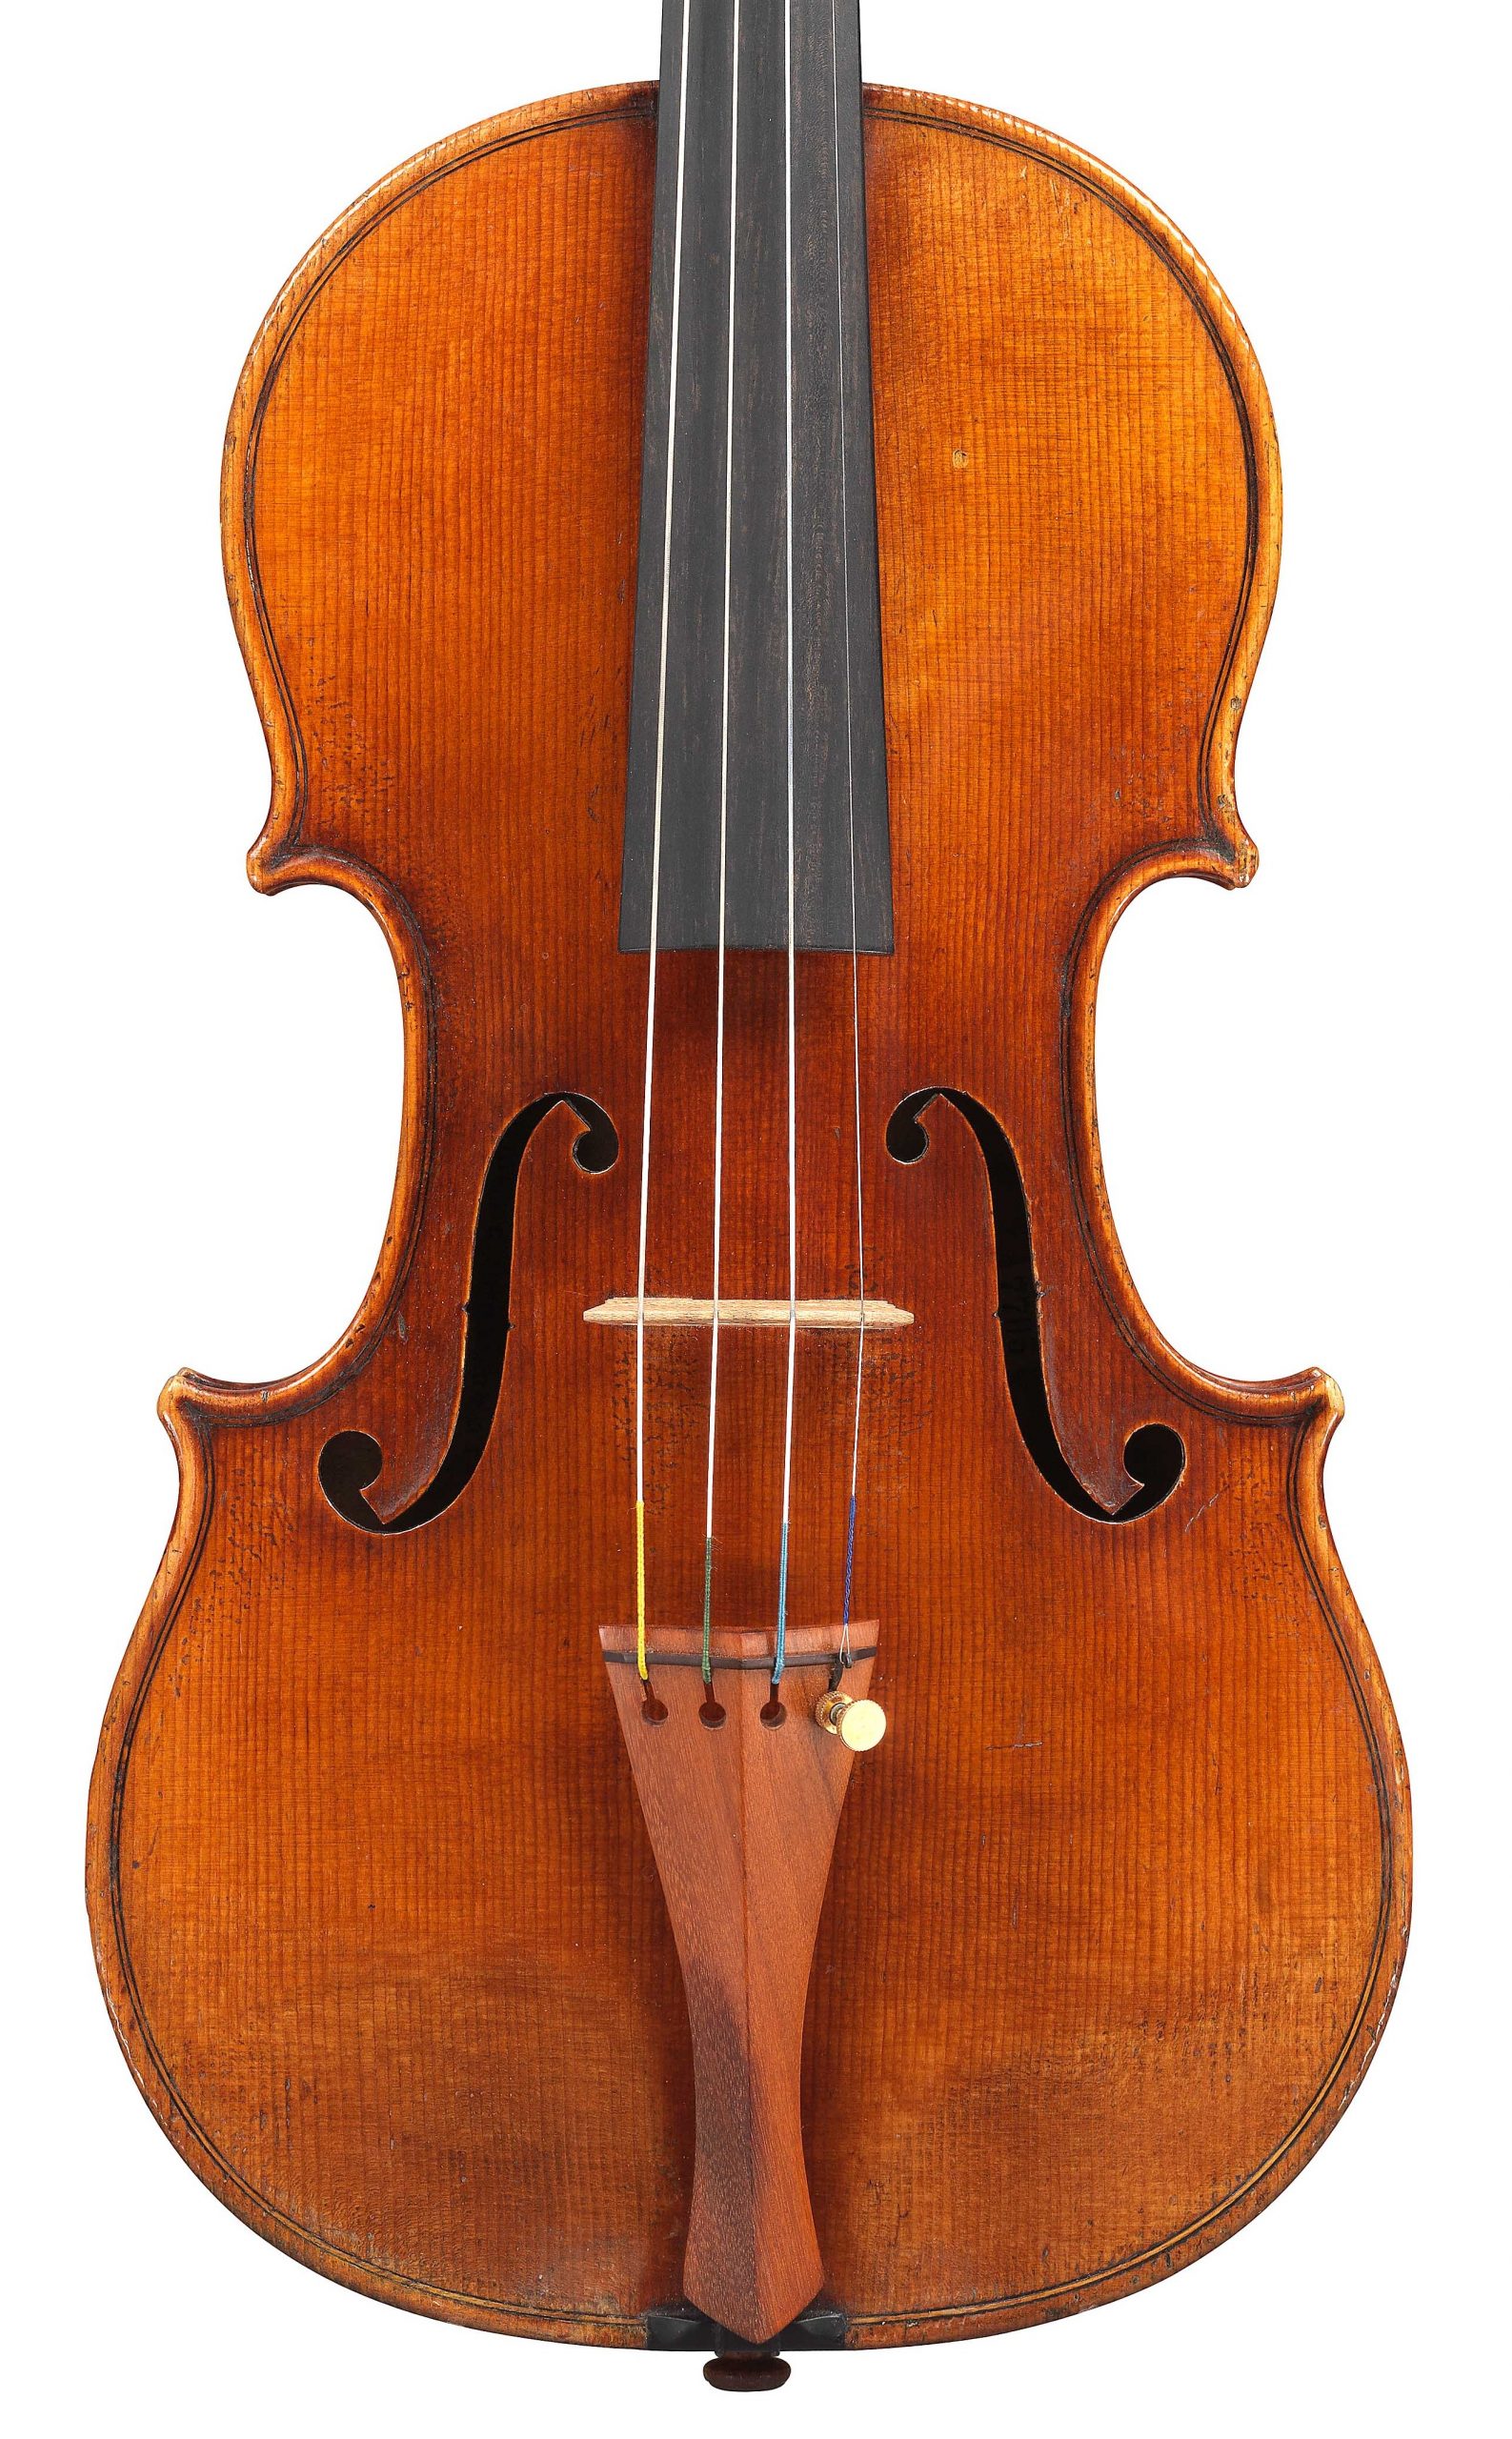 Violin by JB Vuillaume, dated 1859, ex-Karrman, exhibited by Ingles & Hayday at Sotheby's in 2012